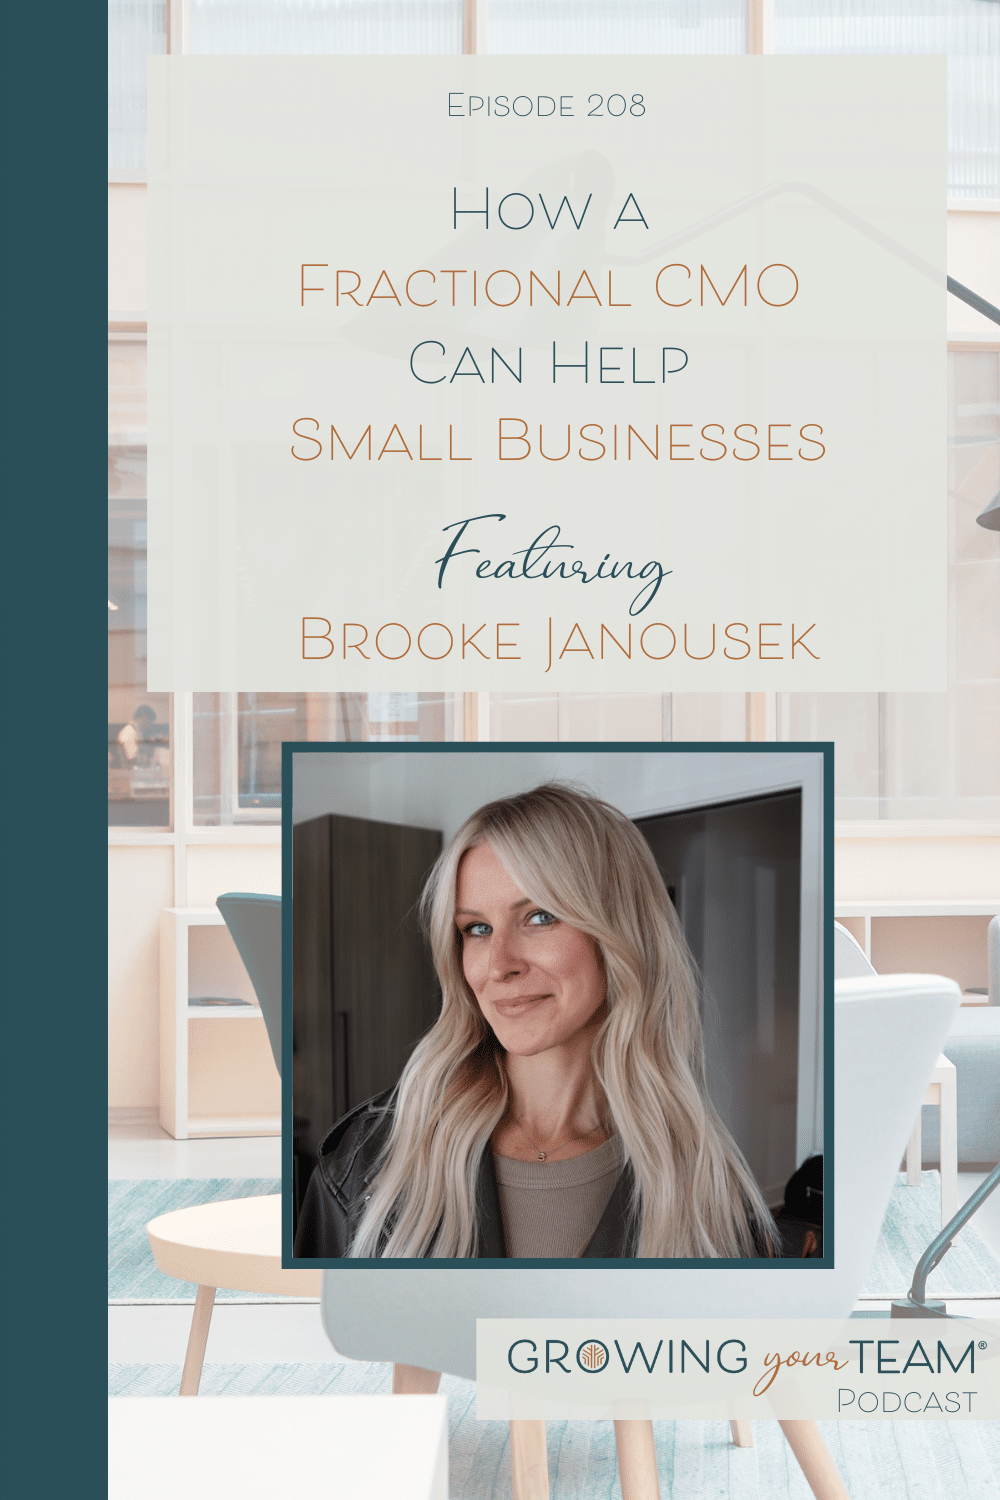 How Can a Fractional CMO Help Small Businesses with Brooke Janousek, Growing Your Team Podcast, Jamie Van Cuyk, Small Business